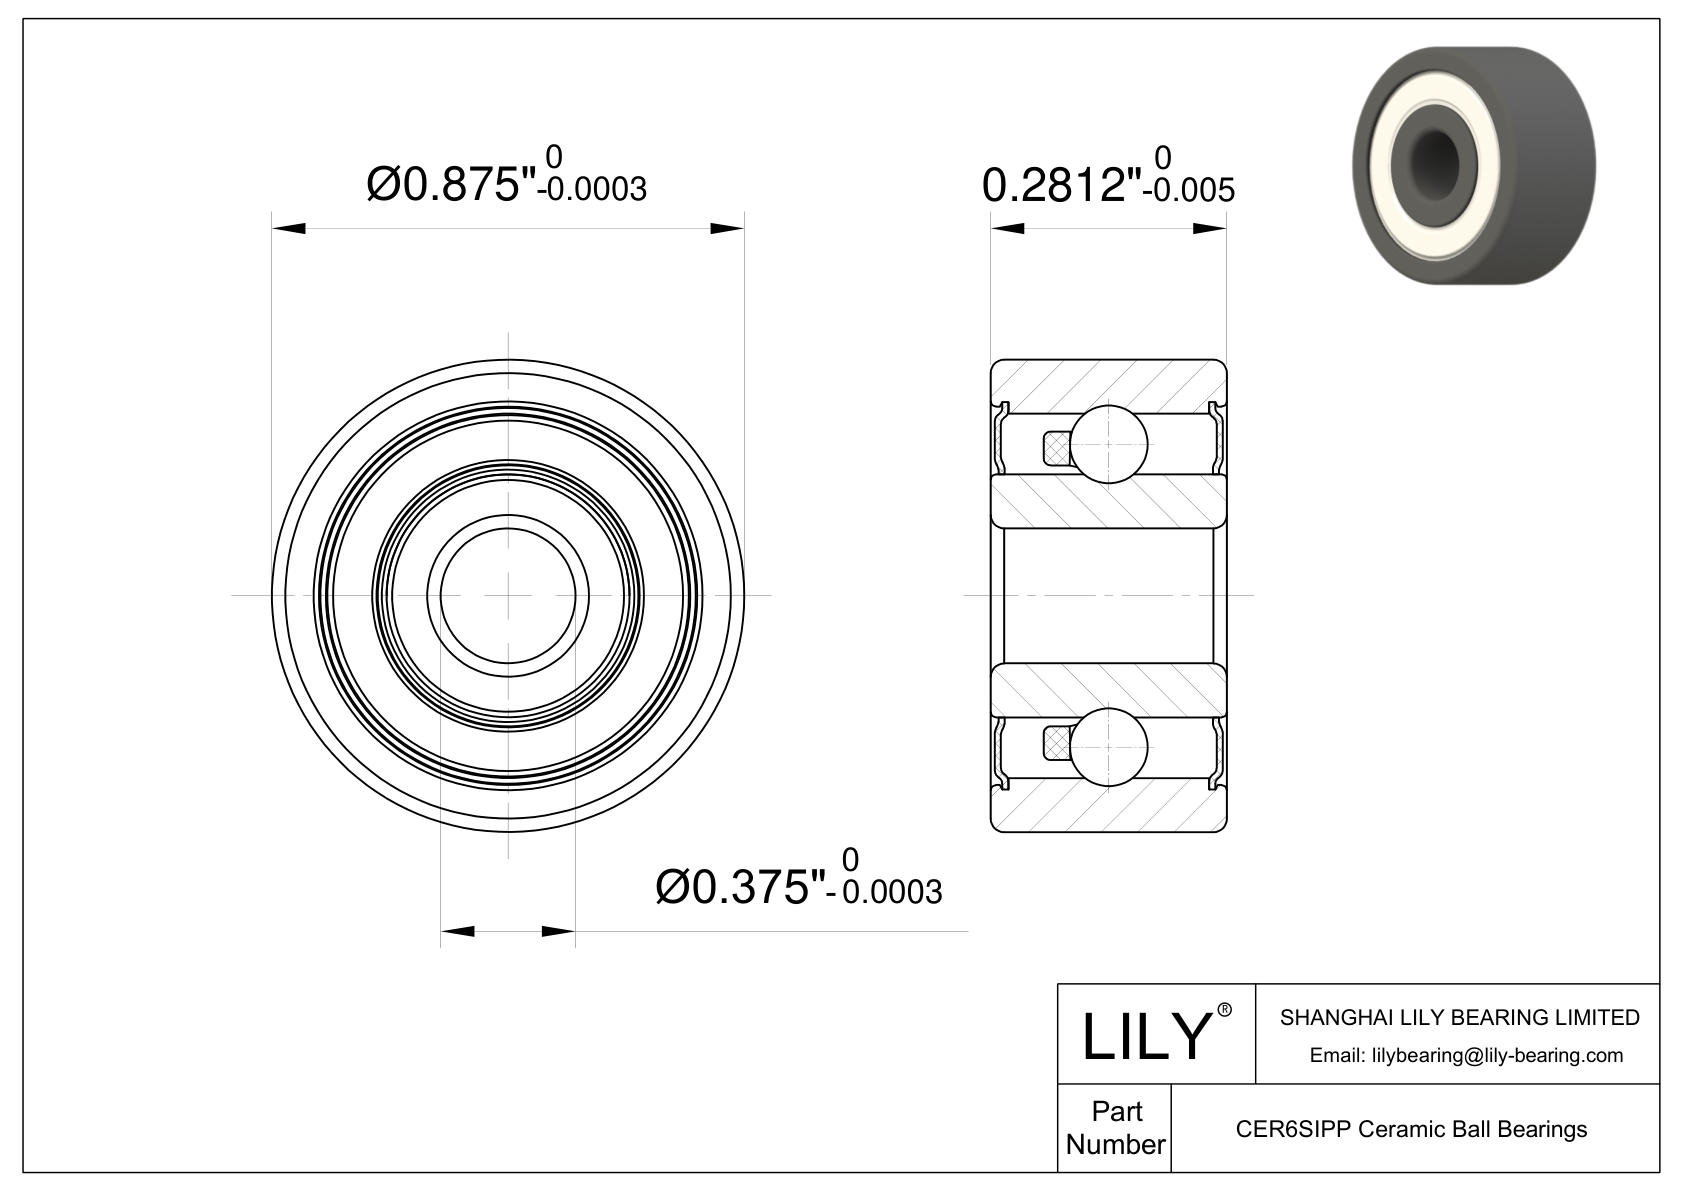 CESI R6 2RS Inch Size Silicon Nitride Ceramic Bearings cad drawing